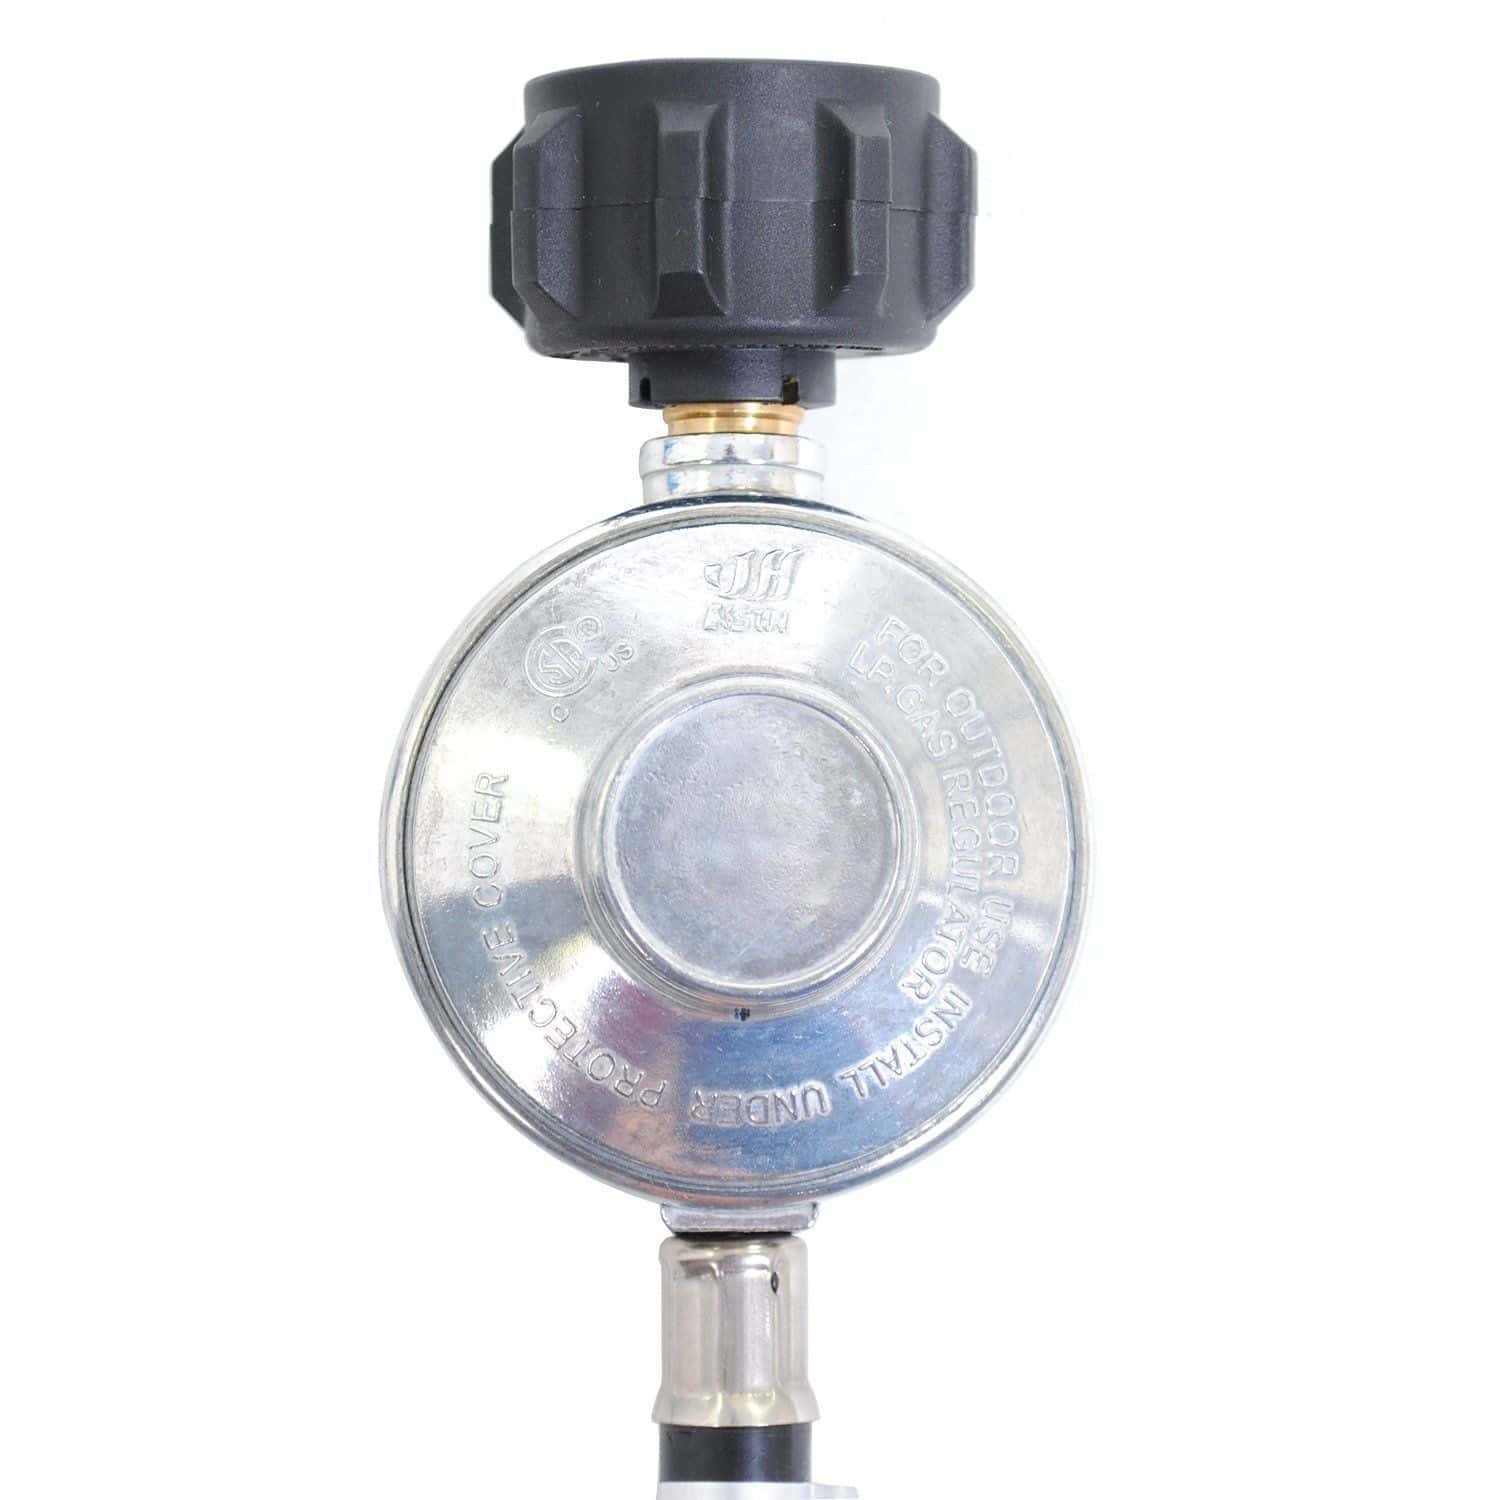 A gas pressure gauge on a white background.